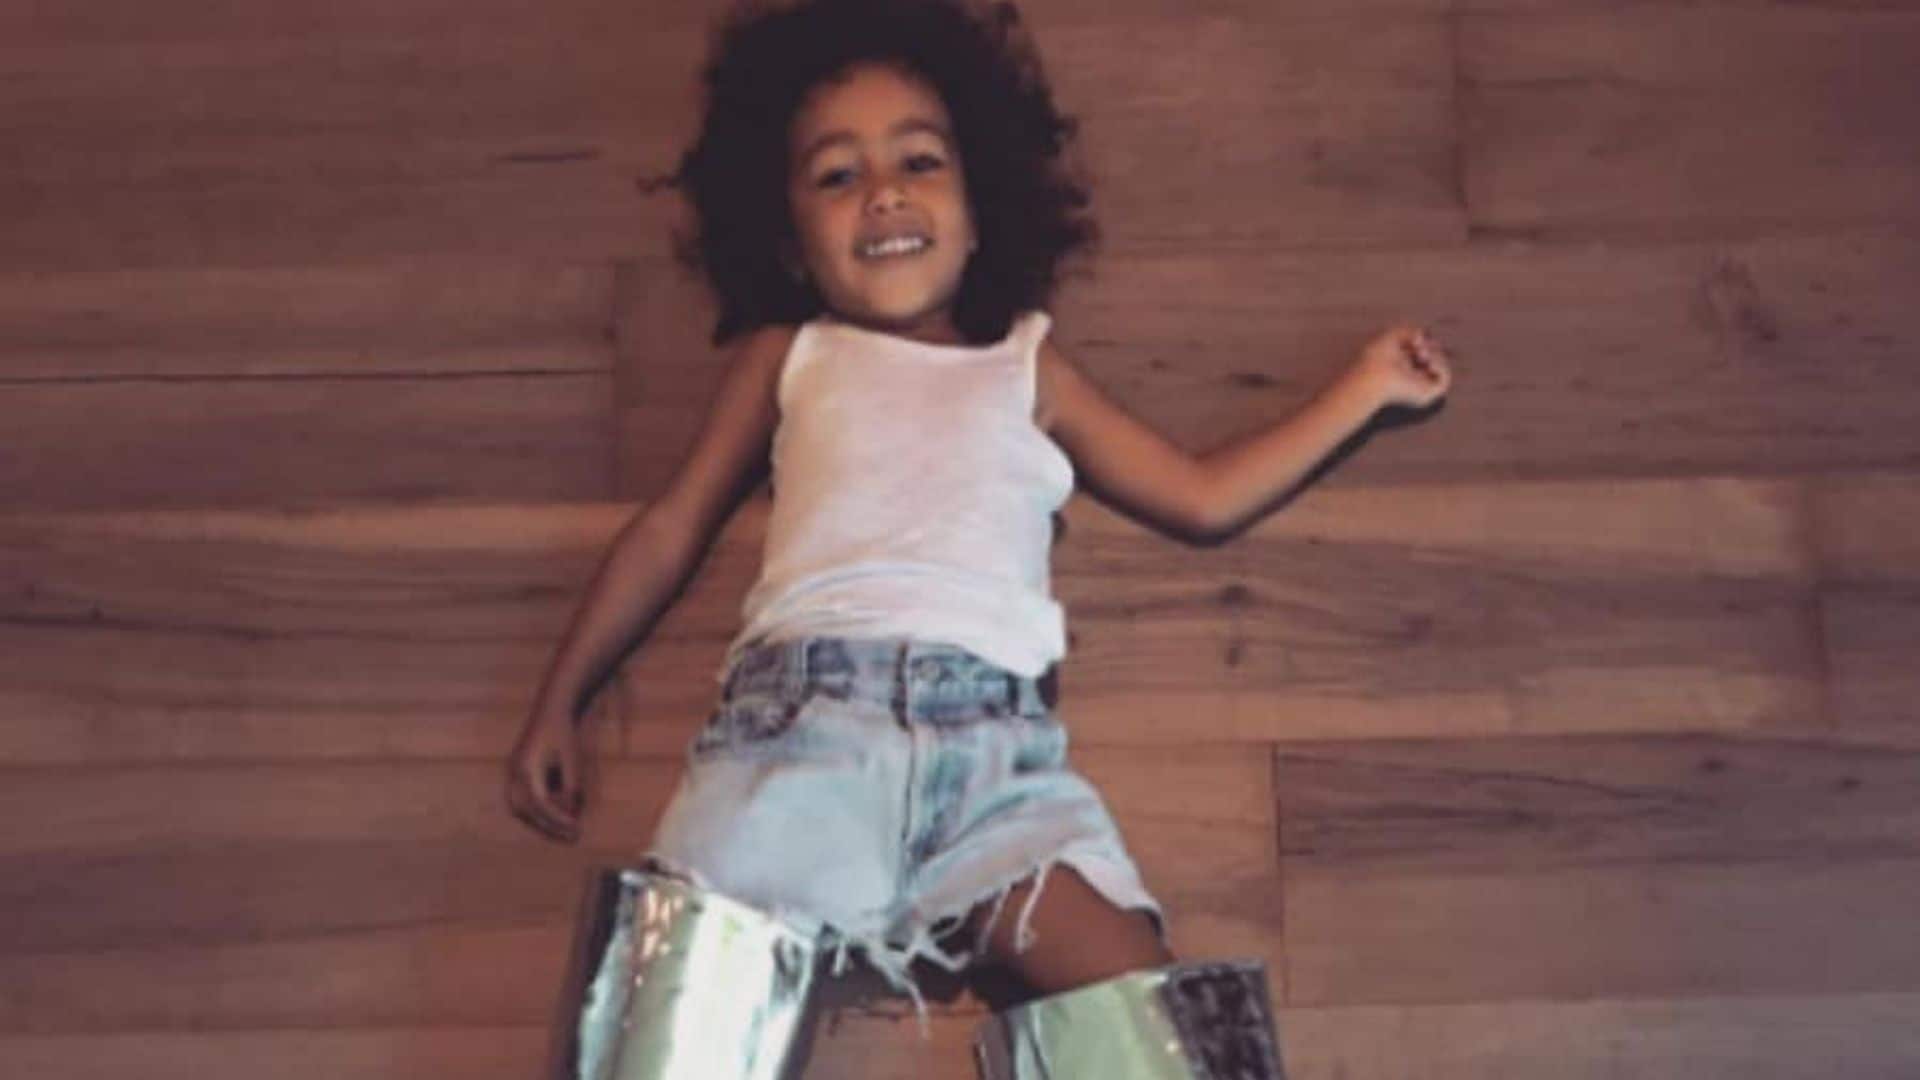 Kim Kardashian and Kanye West's daughter North West is already designing her own clothes